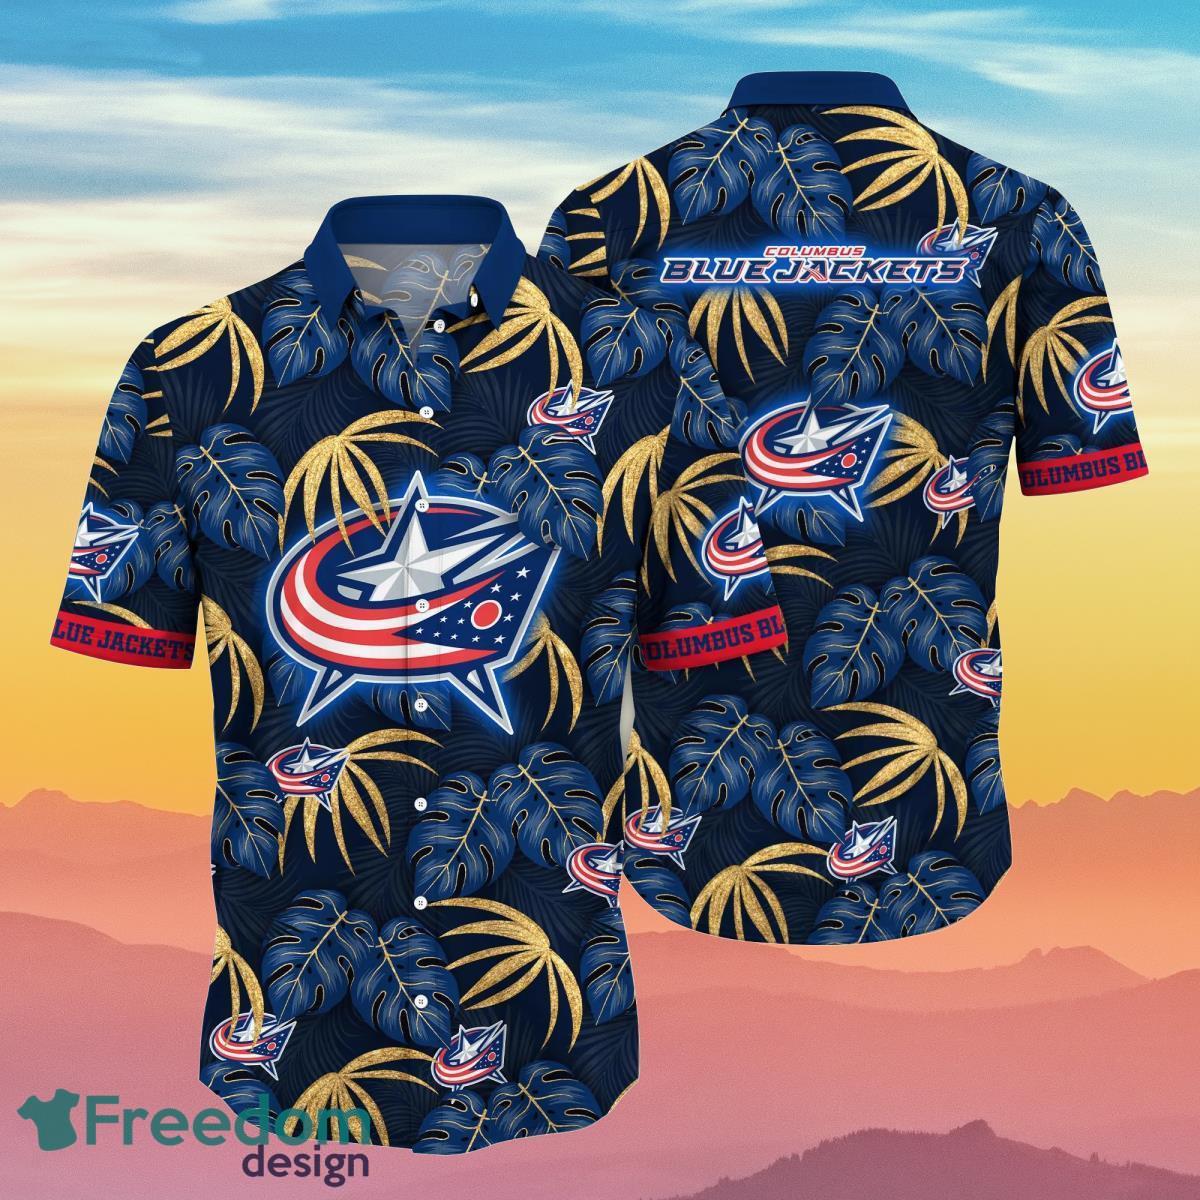 New Uniform idea for the Columbus Blue Jackets using the new